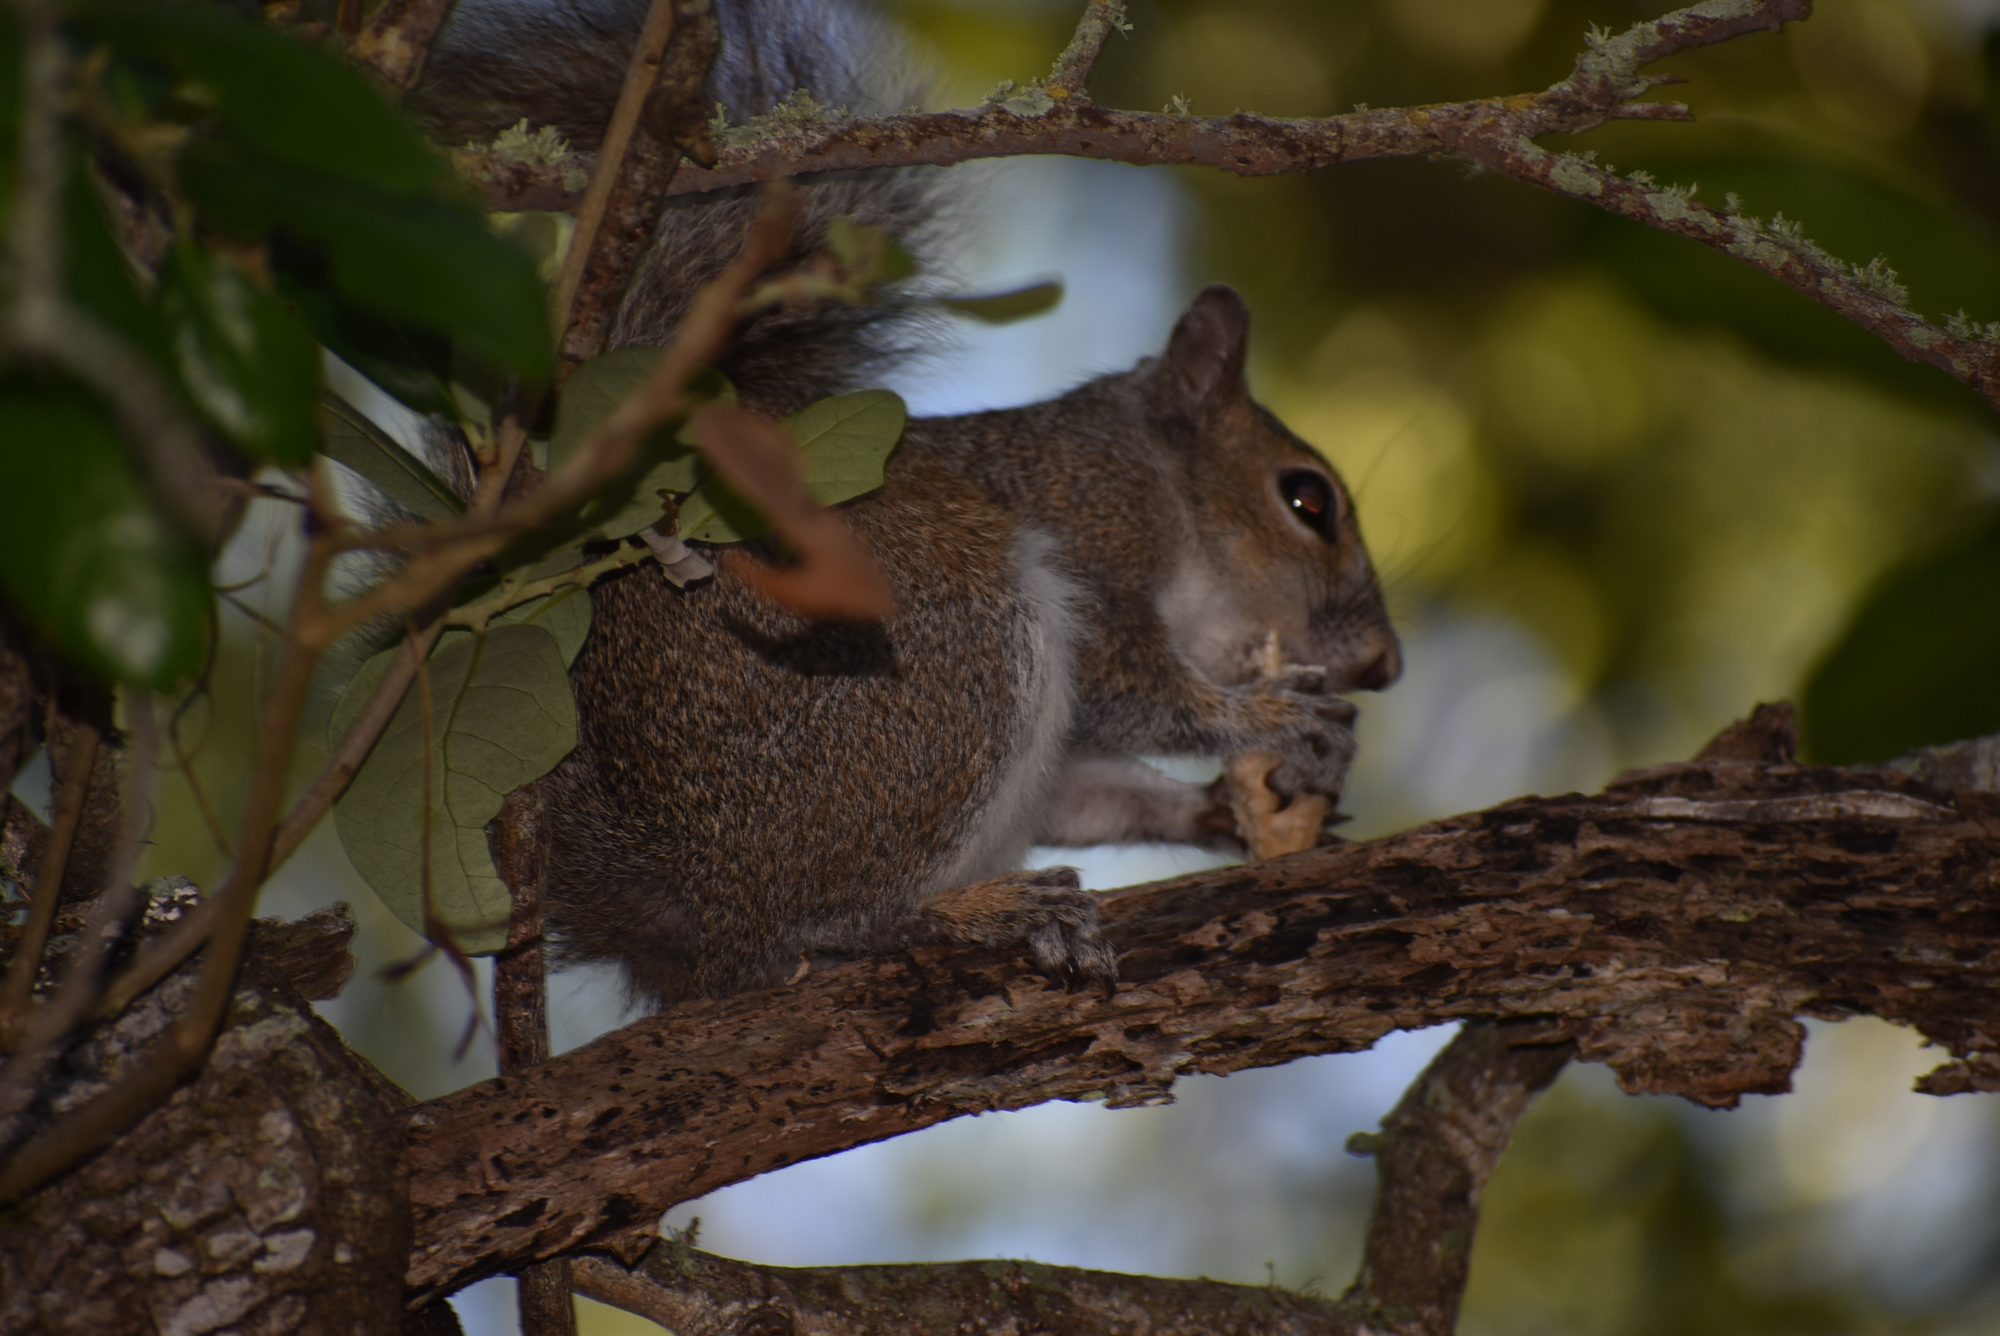 At Bicentennial Park, squirrels and lizards may be the only other living beings you see.